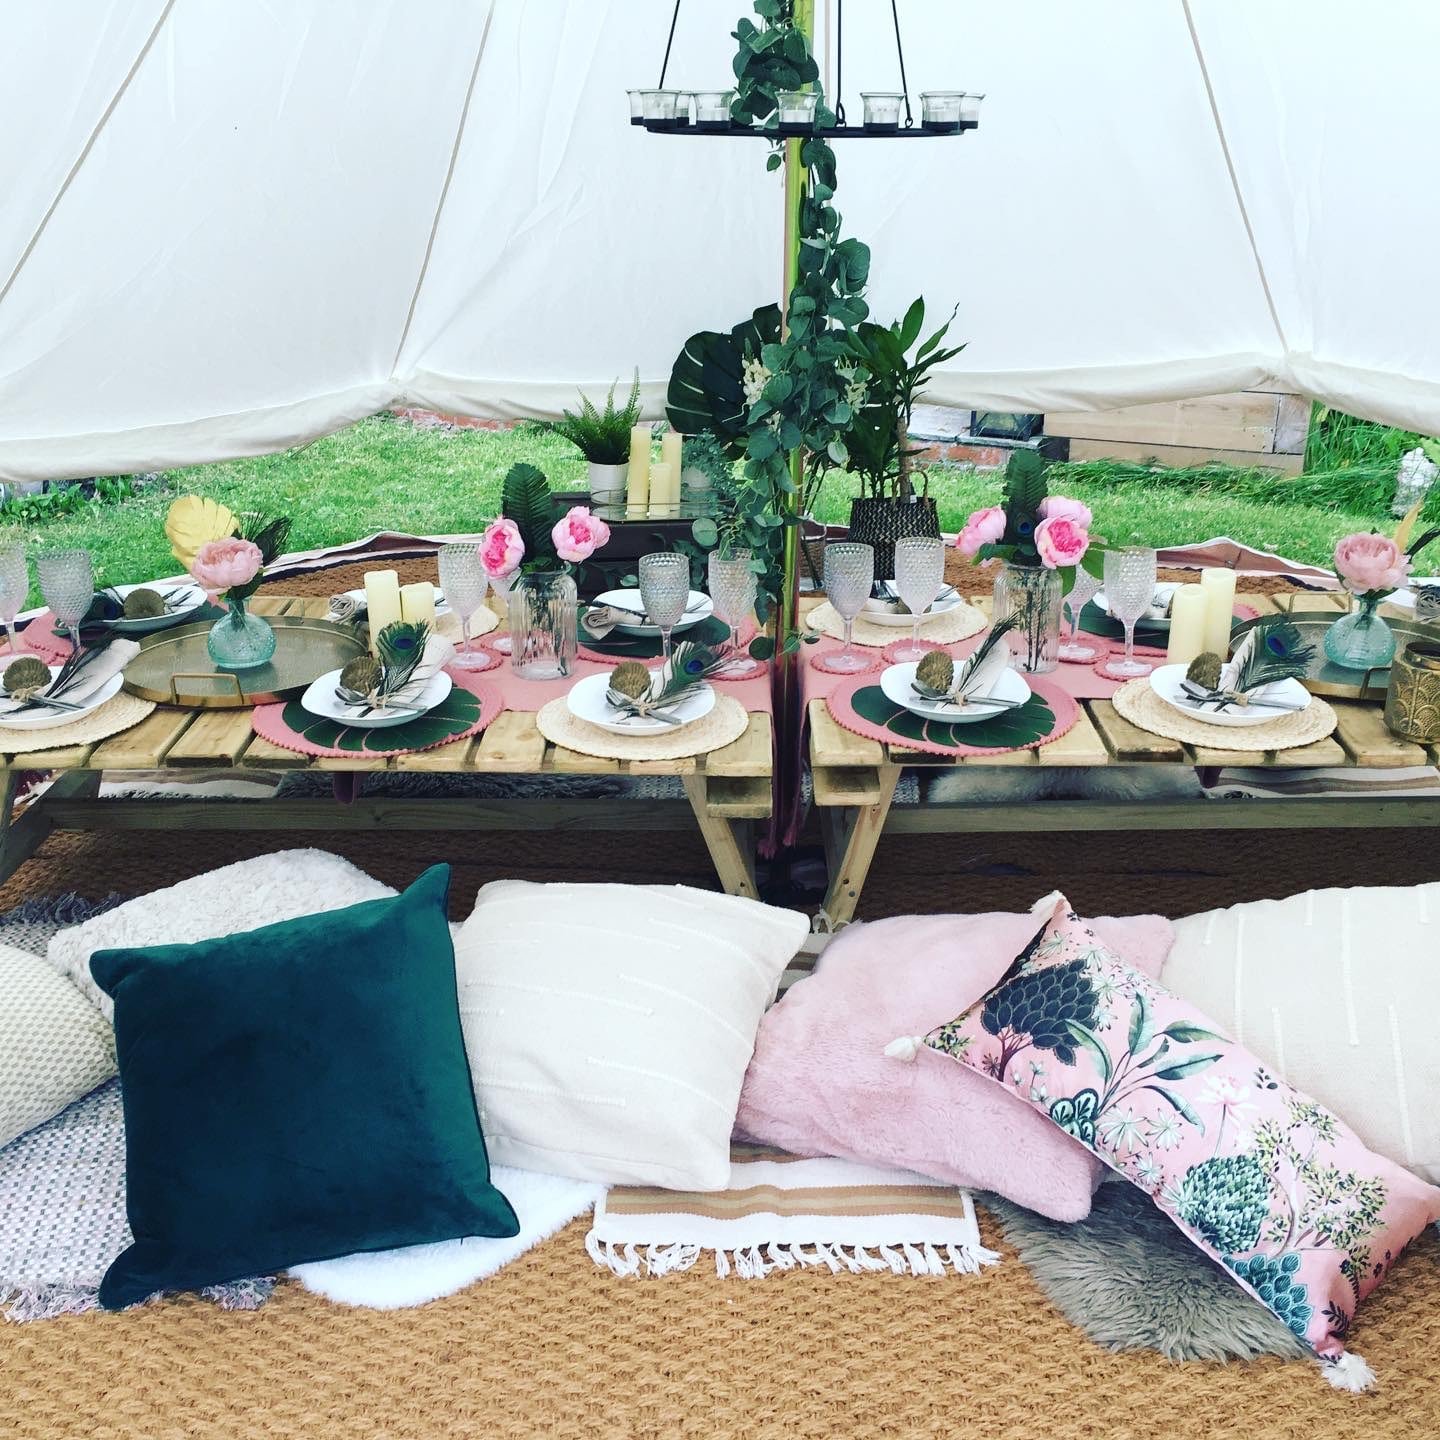 Perfectly Pitched Events - Sleepover party tents for hire in Nottinghamshire